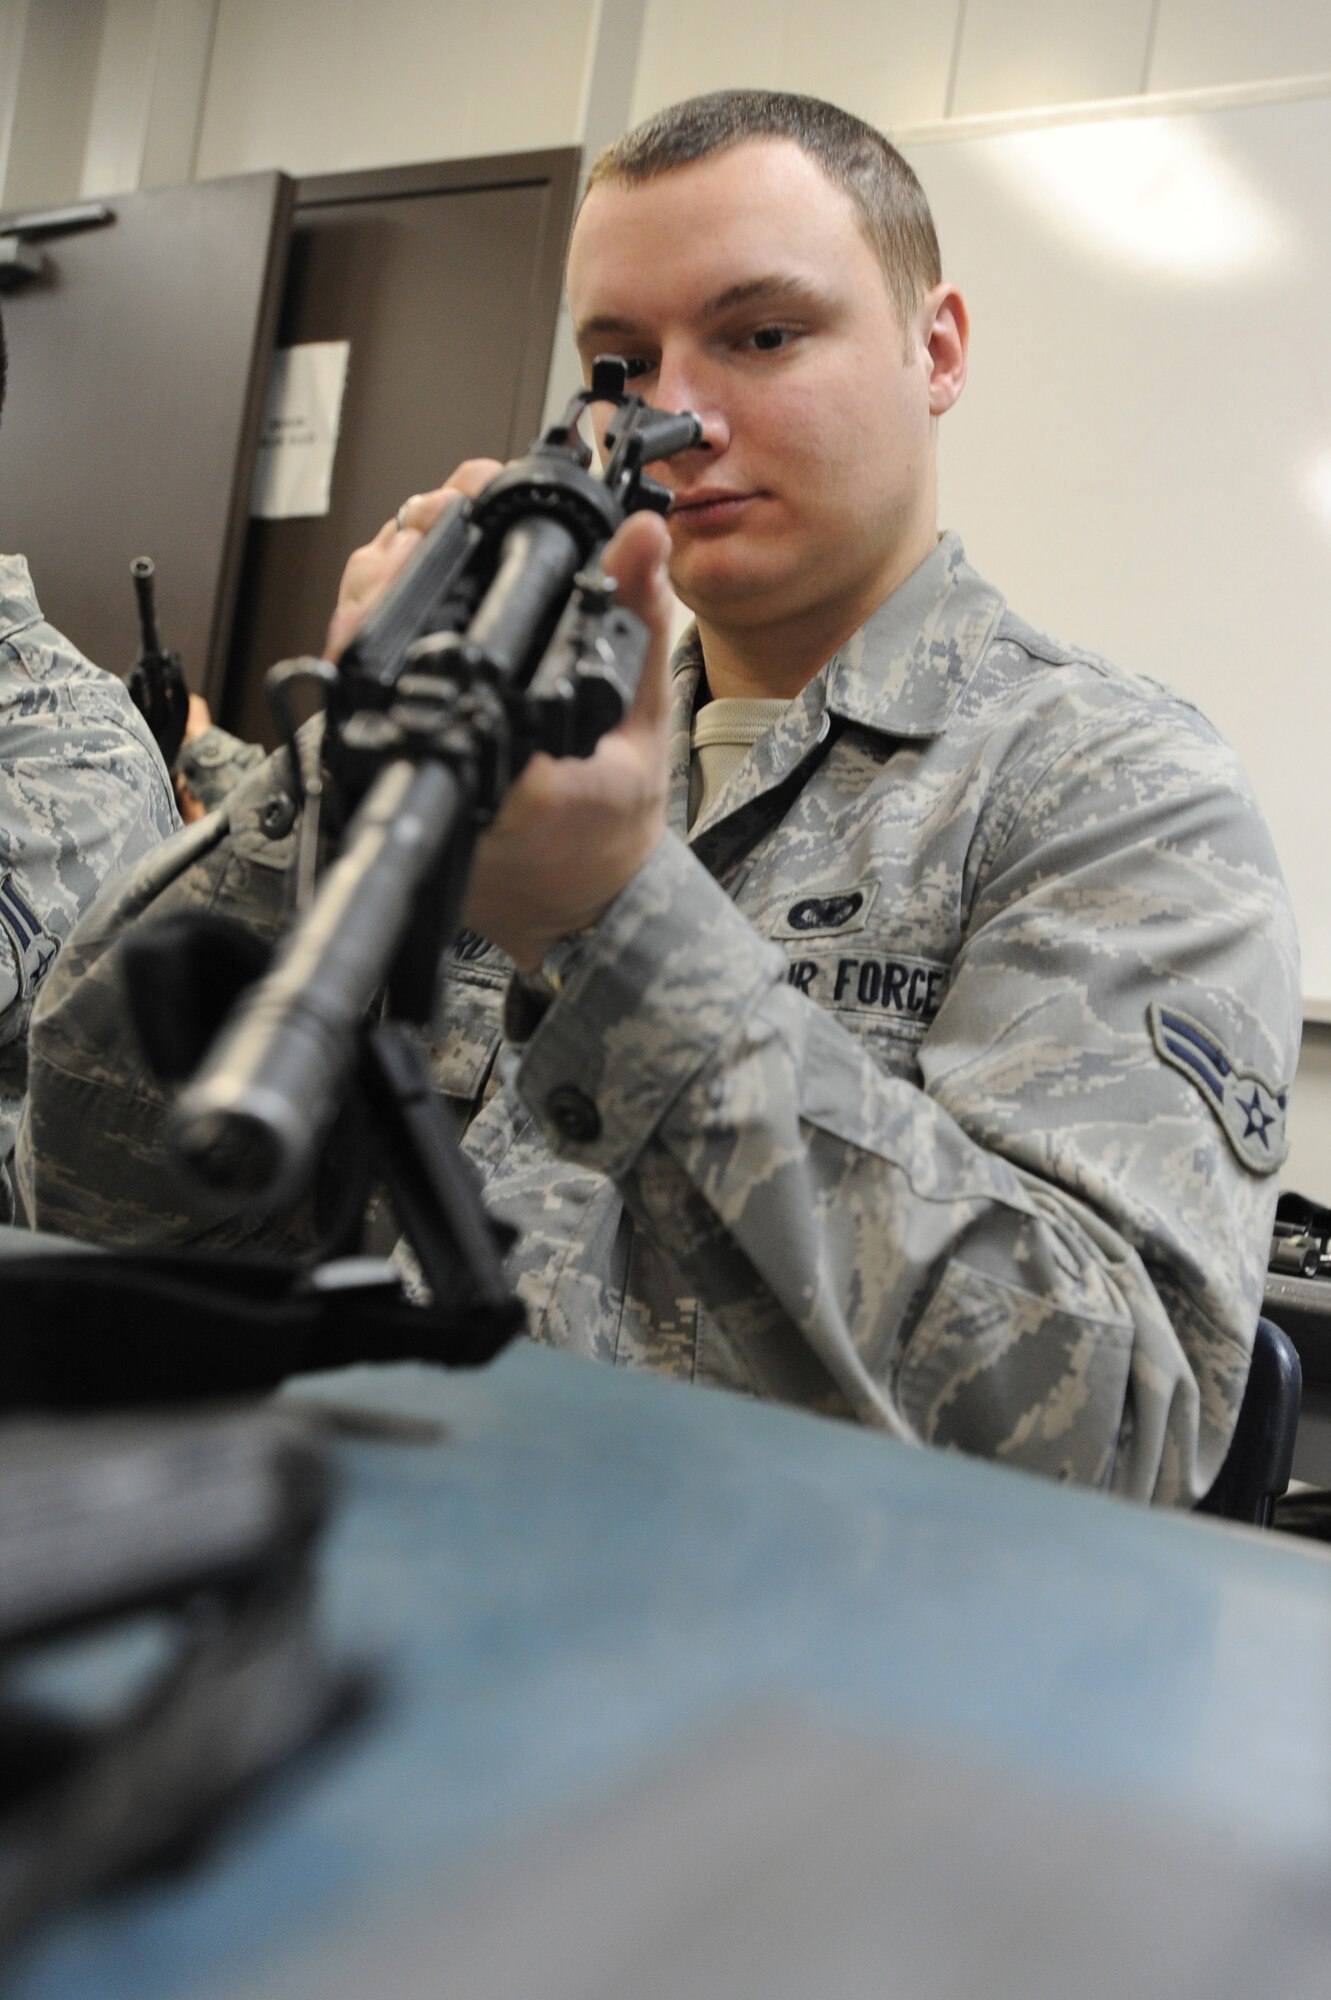 WHITEMAN AIR FORCE BASE, Mo. - Airman 1st Class Scott Maynard, 509th  Security Forces Squadron patrolman, inspects the barrel of his M-4 carbine to ensure no debris is stuck down inside during combat arms training here, March 16, 2010.(U.S. Air Force photo by Airman 1st Class Carlin Leslie )(Released)








